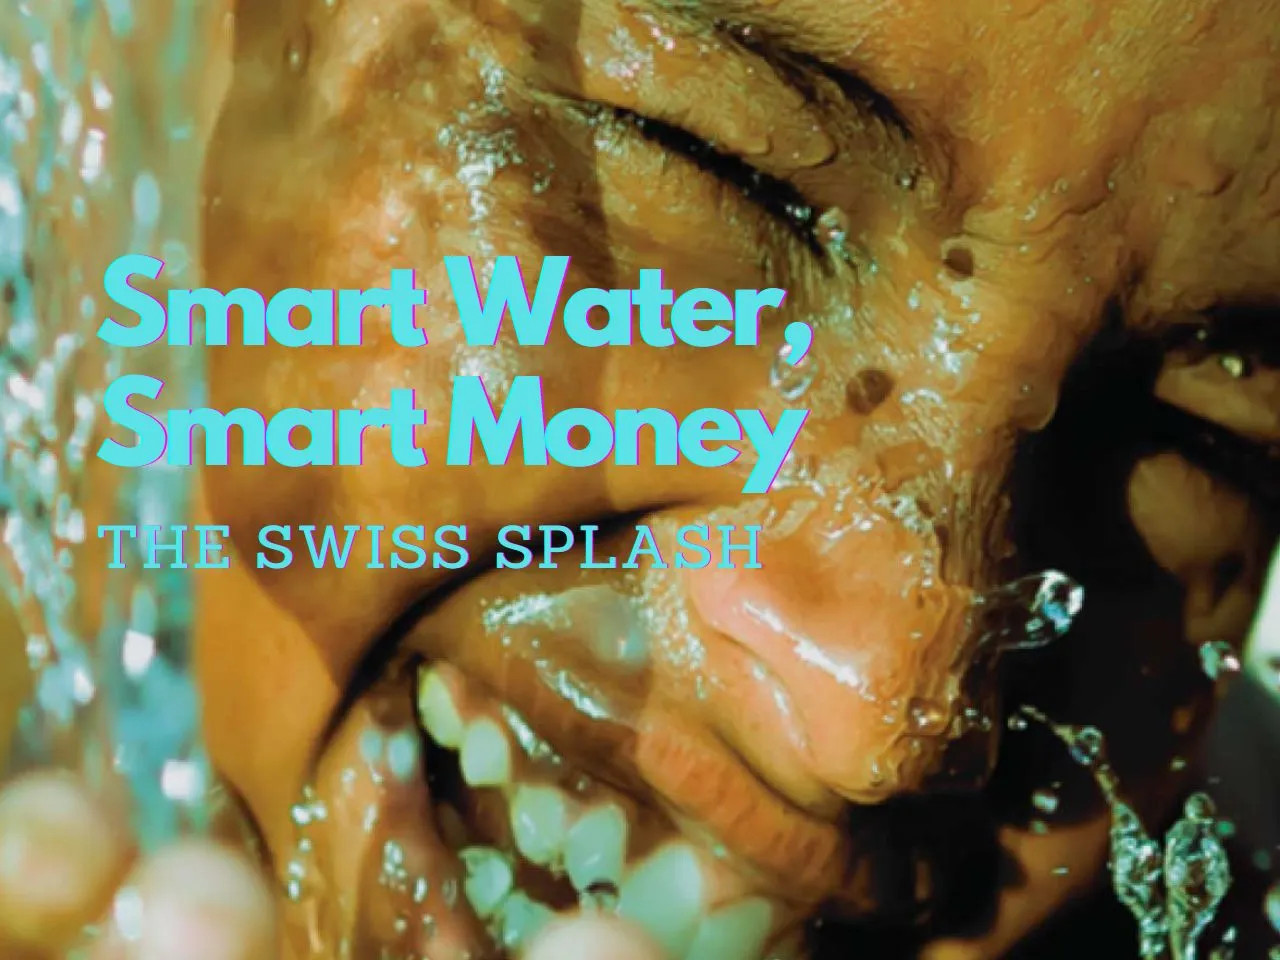 Smart Water Treatment Startup INDRA Bags $4 Mn Funds From Switzerland